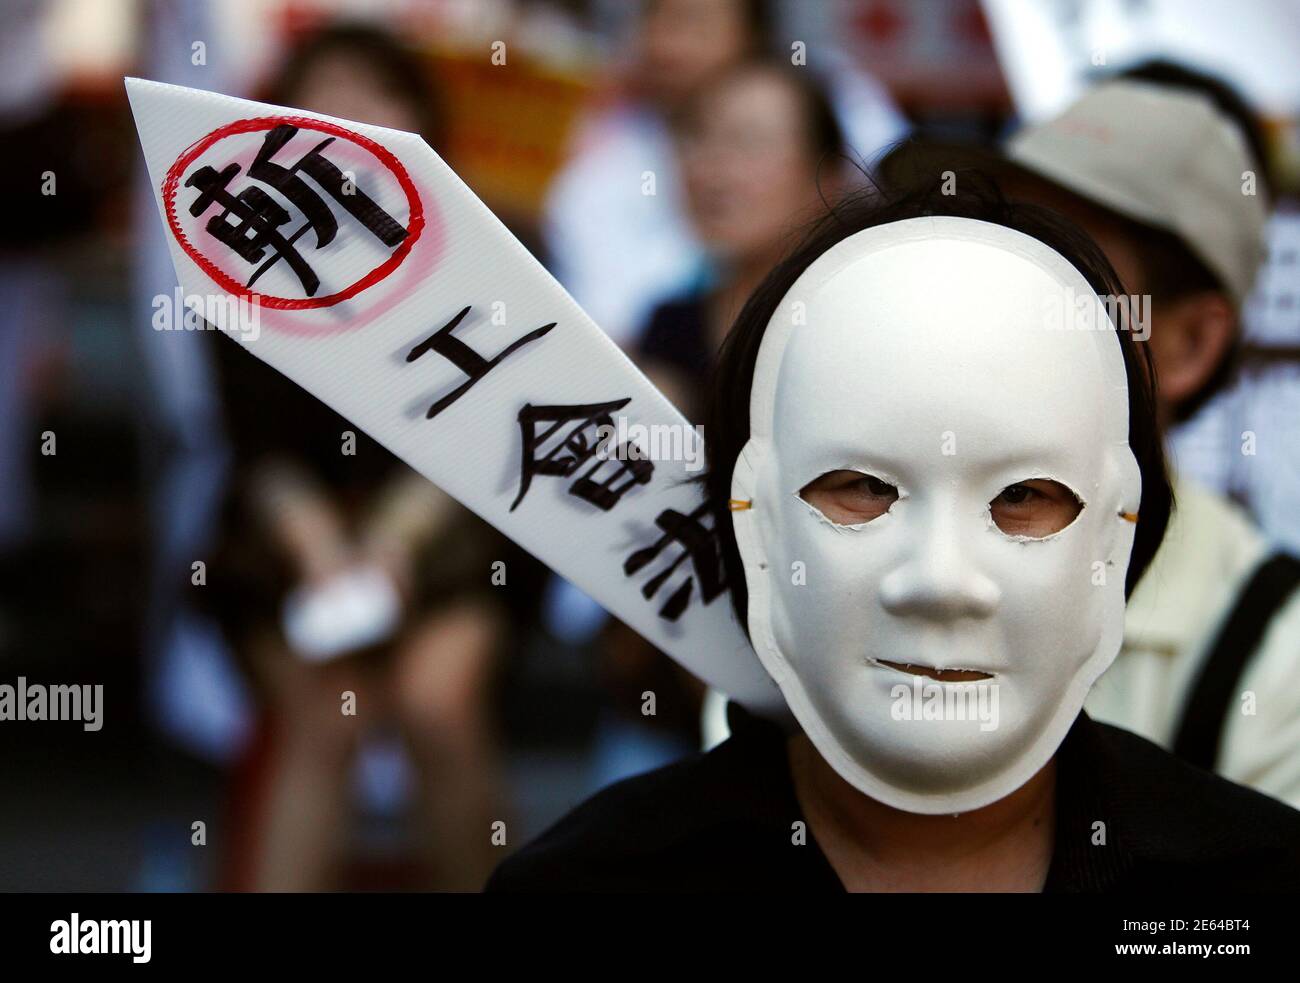 A employee wears a mask during a protest against Nan Shan Life, which is the Taiwan unit of AIG, outside their building headquarters in Taipei September 28, 2010. The protesters claim that the company is restricting employees' rights to freedom of speech by discouraging against the discussion of company matters with the media. AIG is sure of at least one bidder for its Taiwan Nan Shan Life unit should it put it back on the market, with Chinatrust Financial reaffirming its interest on September 21 after the original buyers pulled out. The words on the board read 'Cutting away the worker's union Stock Photo